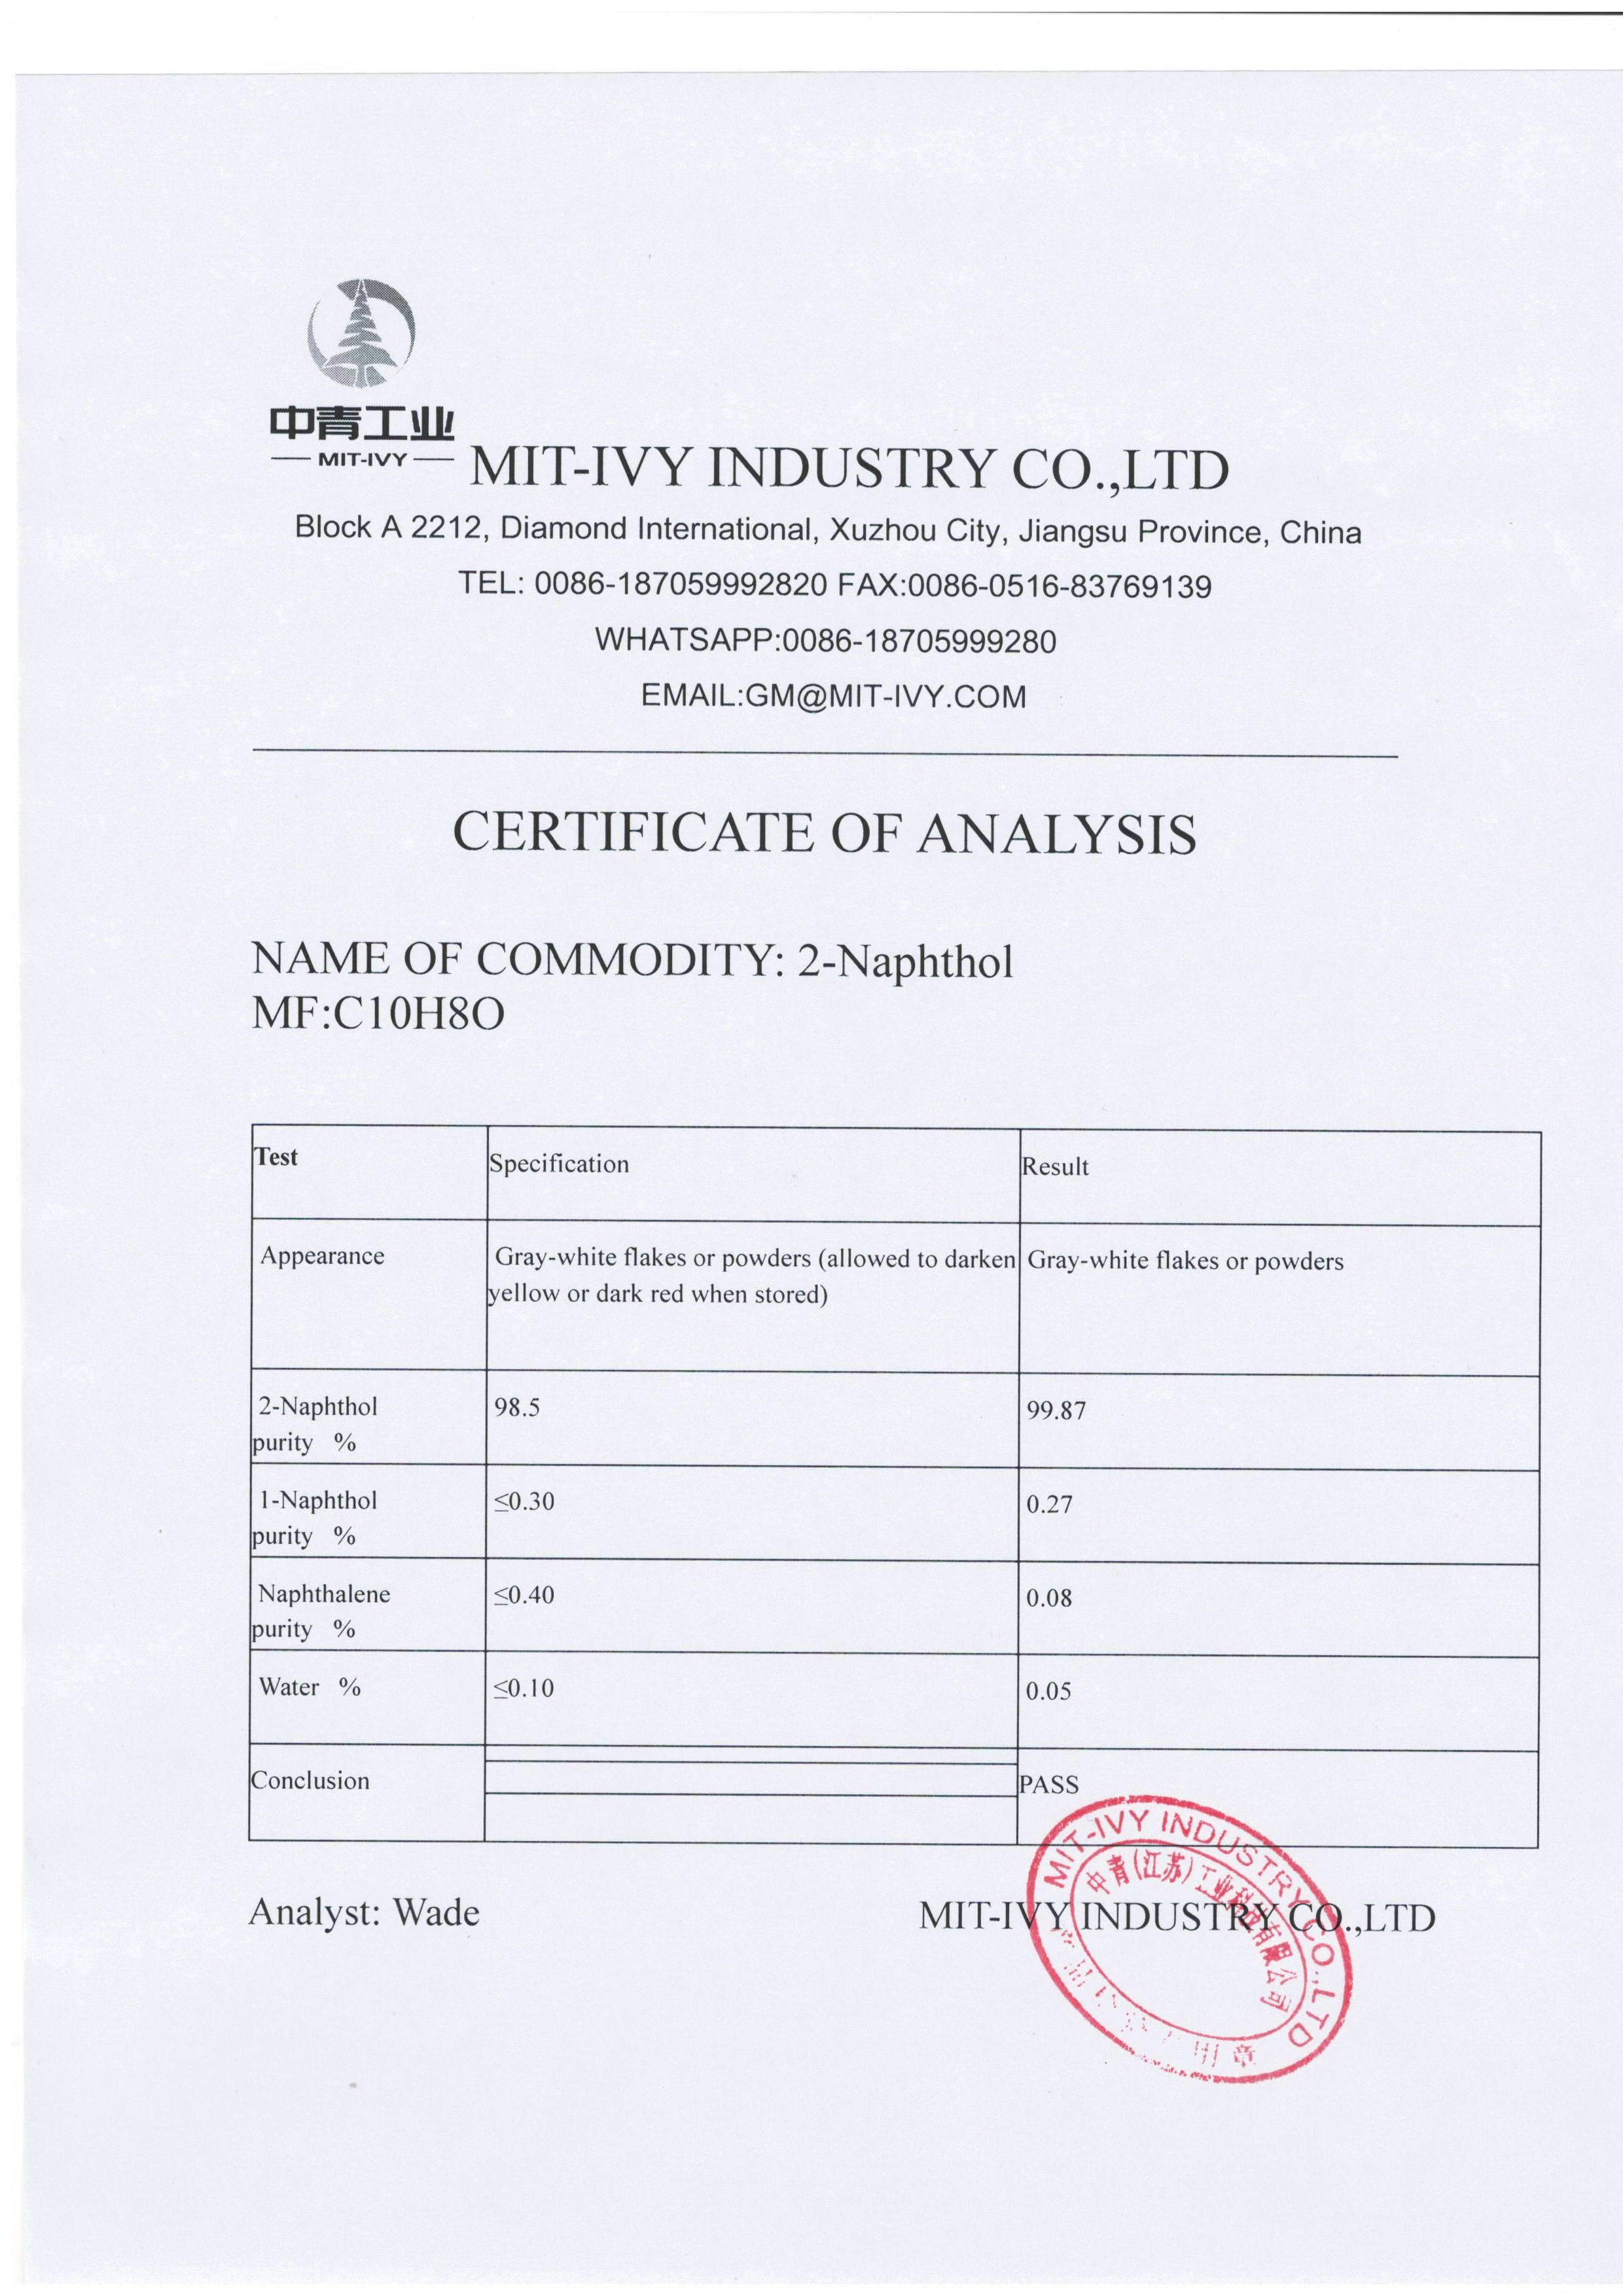 Fixed Competitive Price 4,N,N-Trimethylaniline - mit-ivy industry Athena CEO for  2-Naphthol  beta-naphthol  b-naphtol  naphthalen-2-ol  CAS 135-19-3 – Mit-ivy